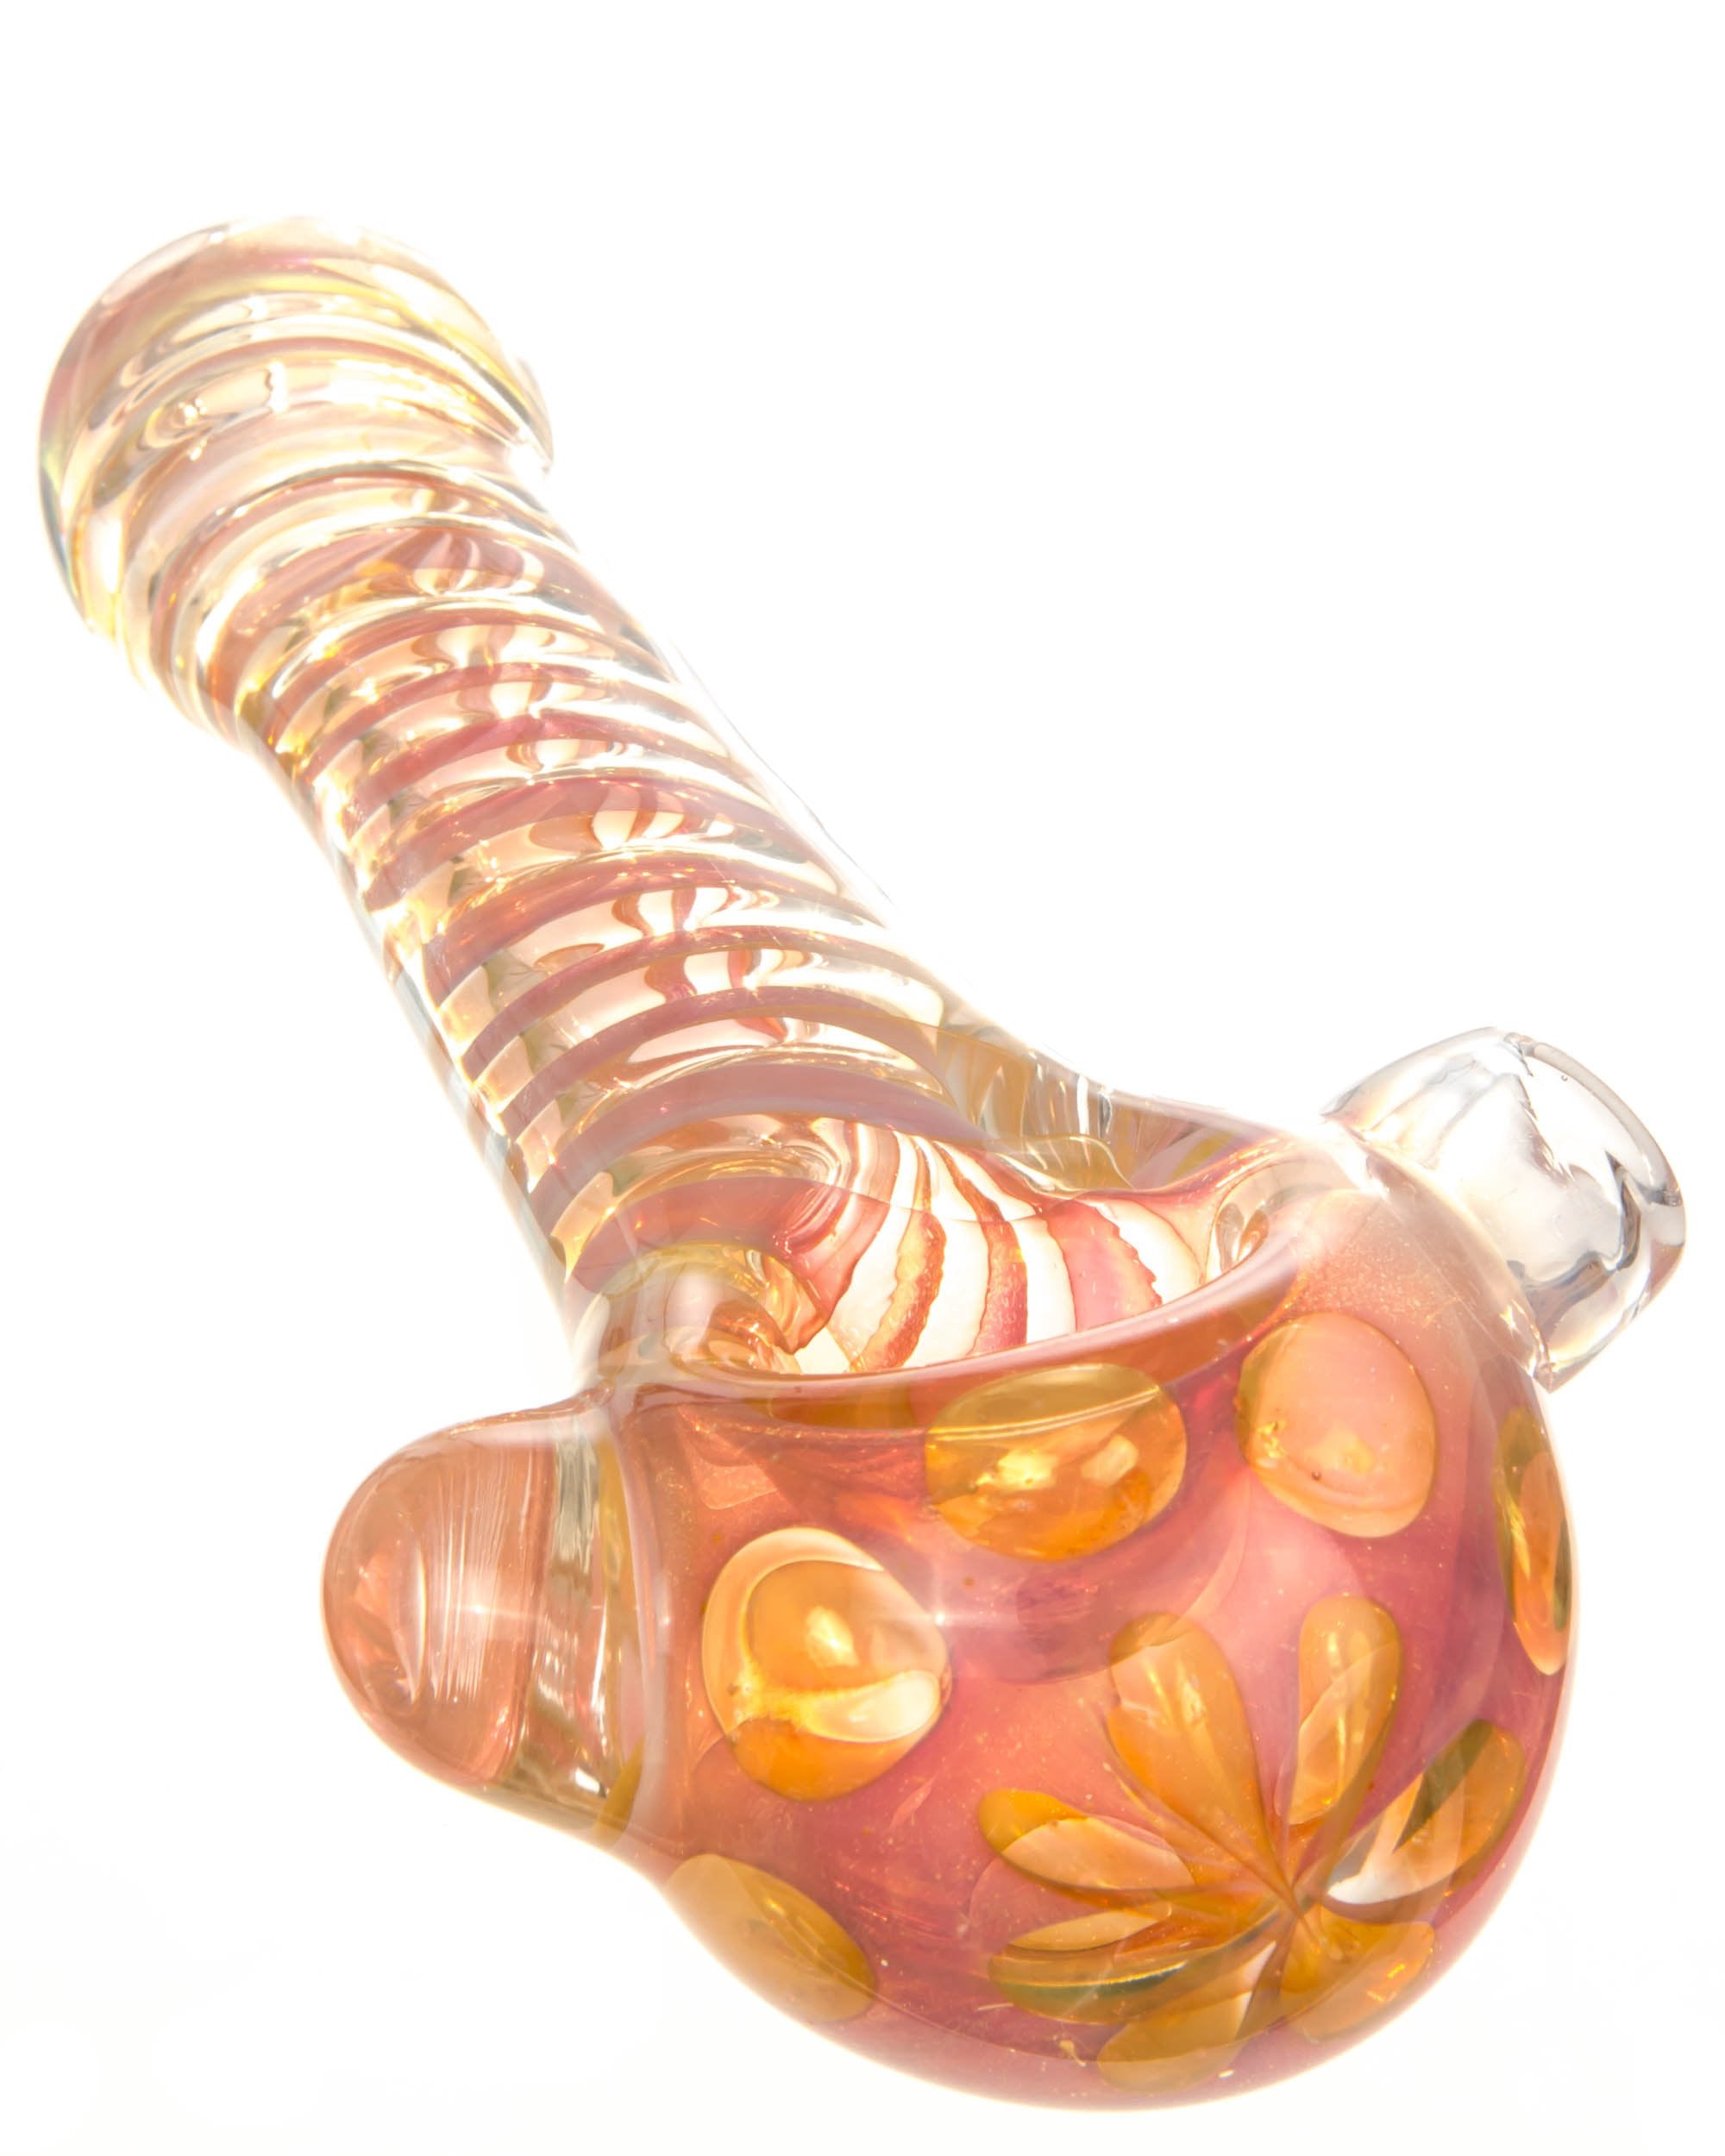 Headshop Encyclopedia - Everything You Need To Know